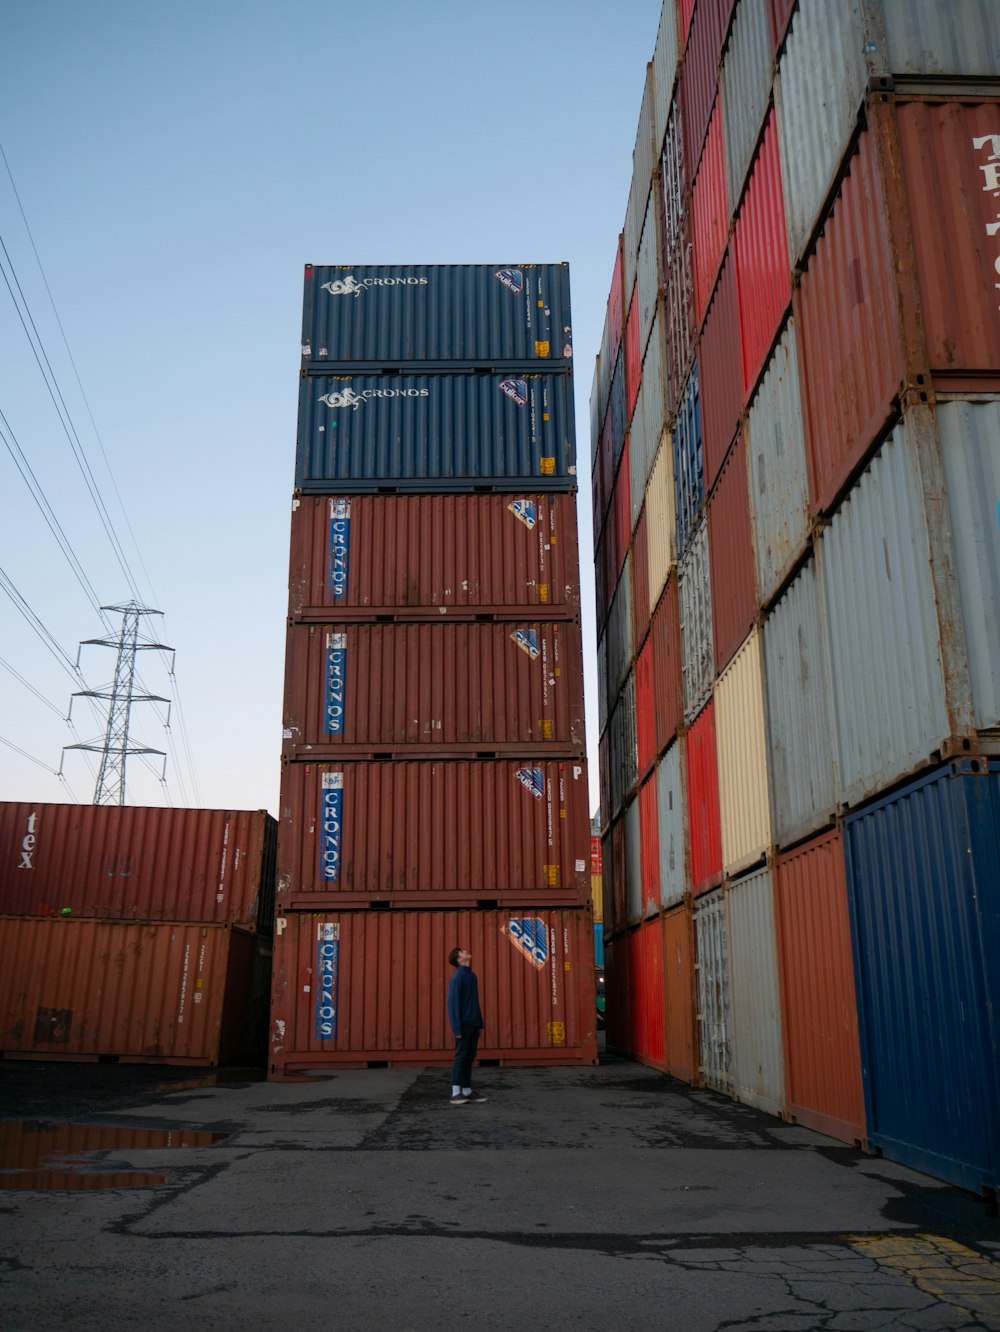 man in blue shirt walking near red cargo containers during daytime